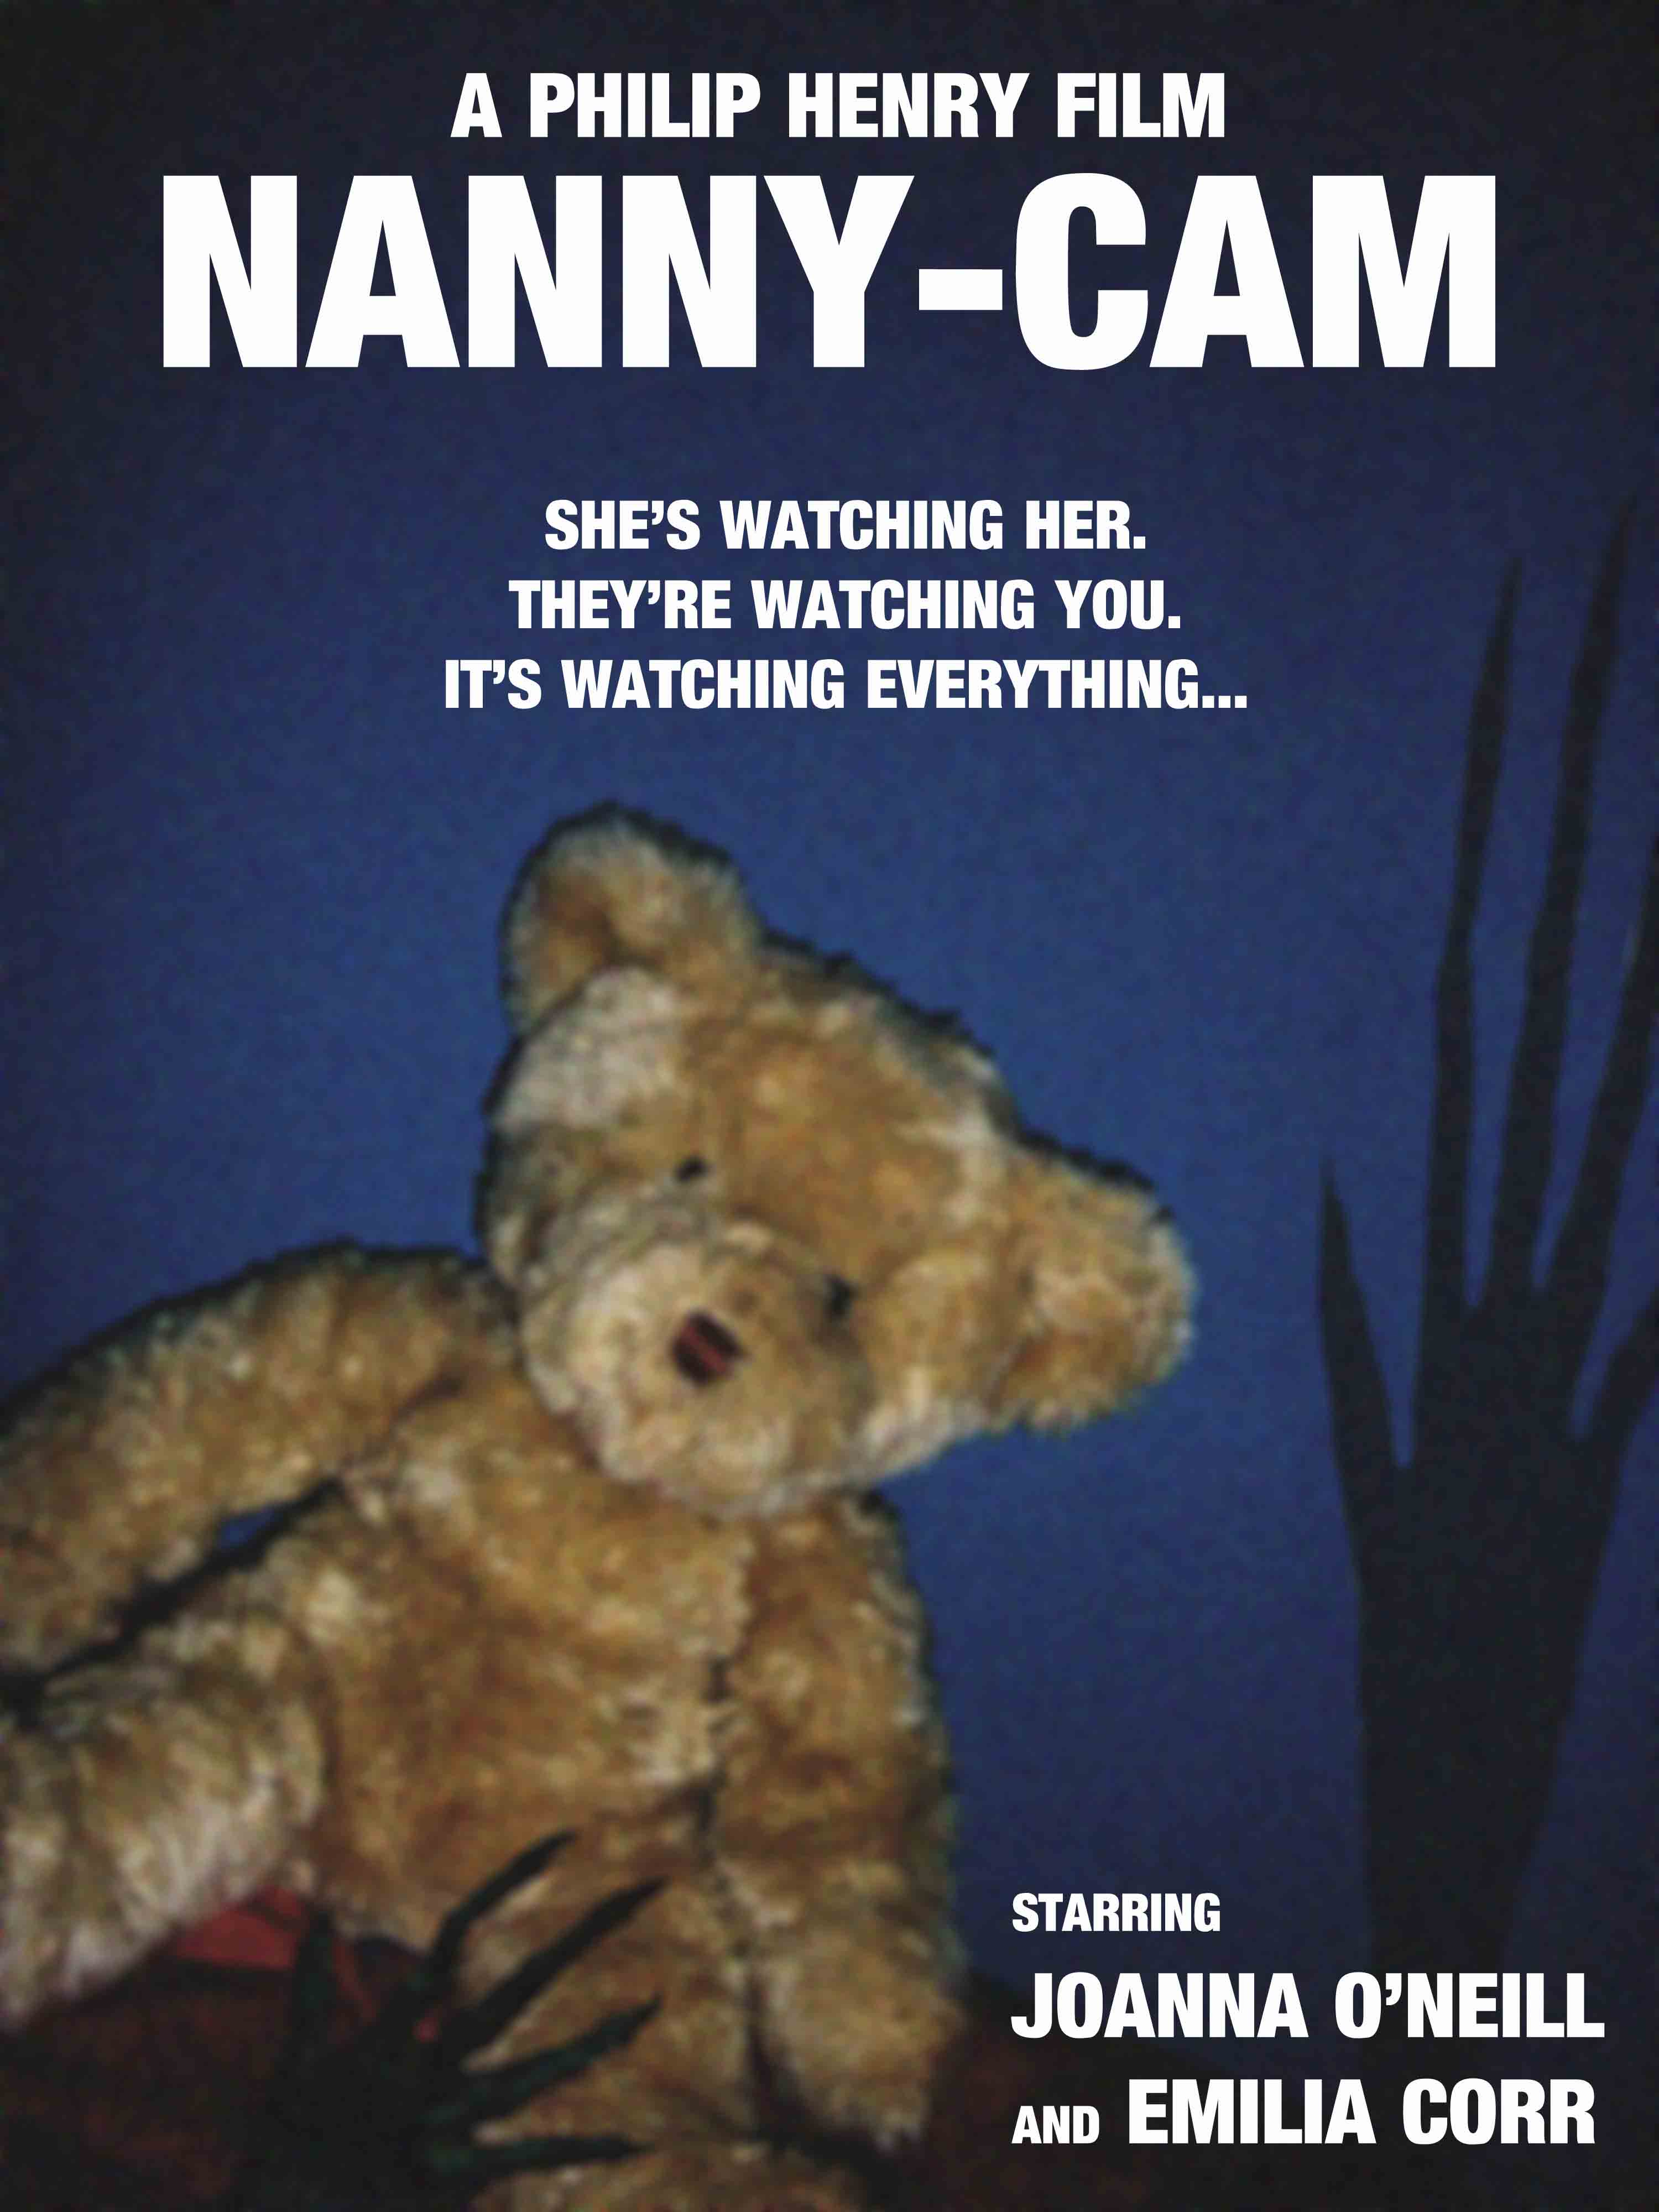 Nanny-Cam poster design by Philip Henry